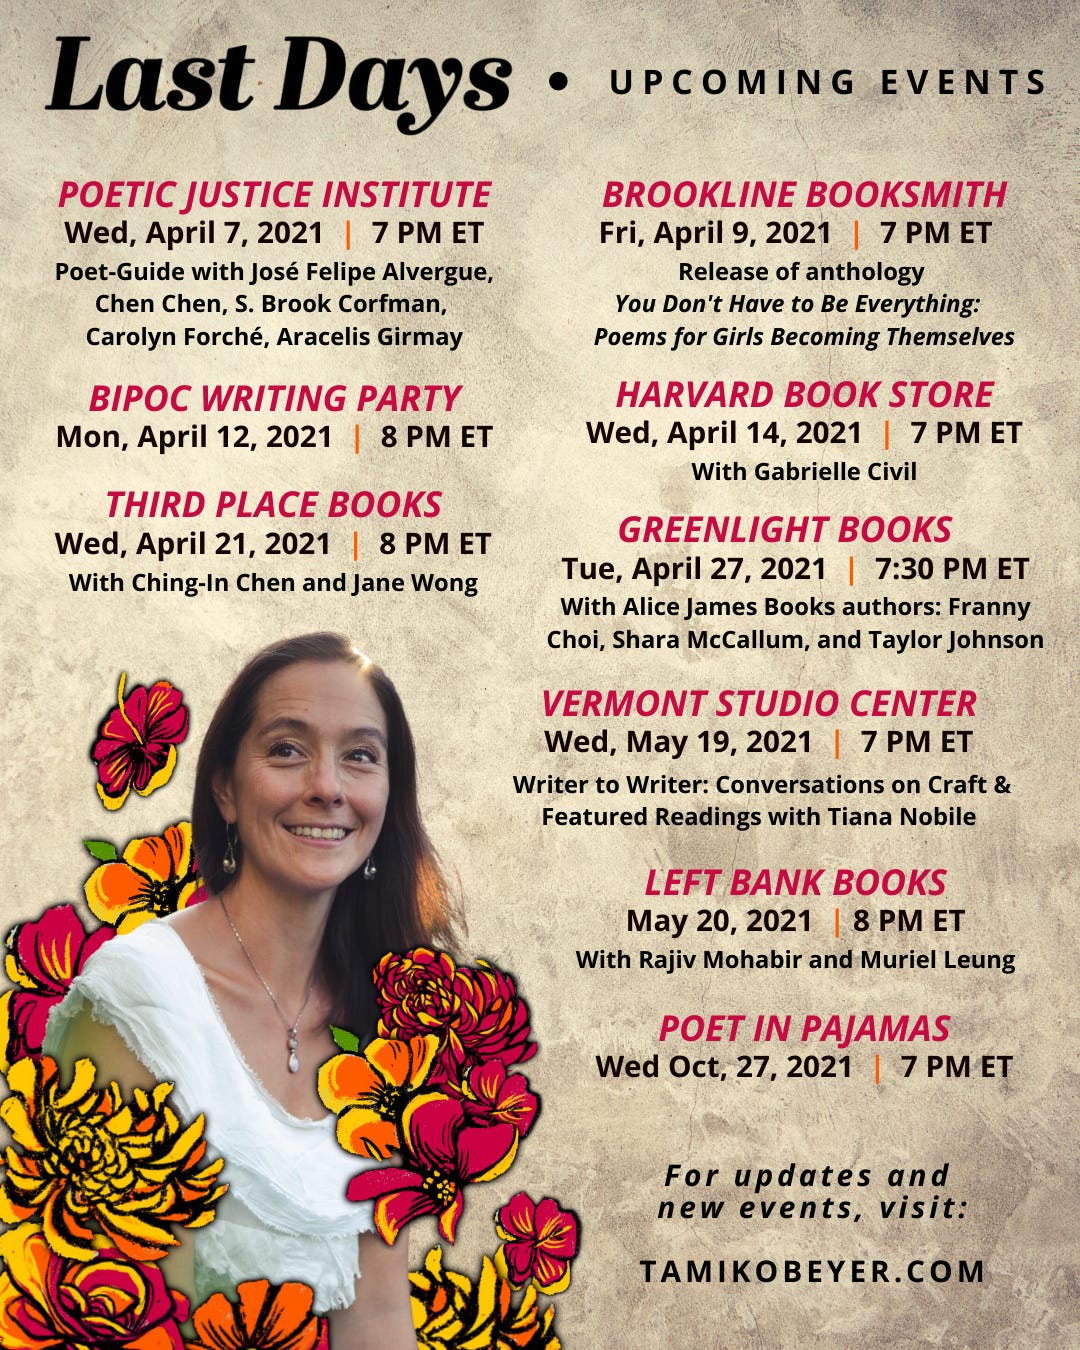 Poster with an image of Tamiko Beyer in a light blue dress looking up and to the left, with red and orange flowers around her. The headline is Last Days, upcoming events. Events are listed out, see https://www.tamikobeyer.com/events for details.